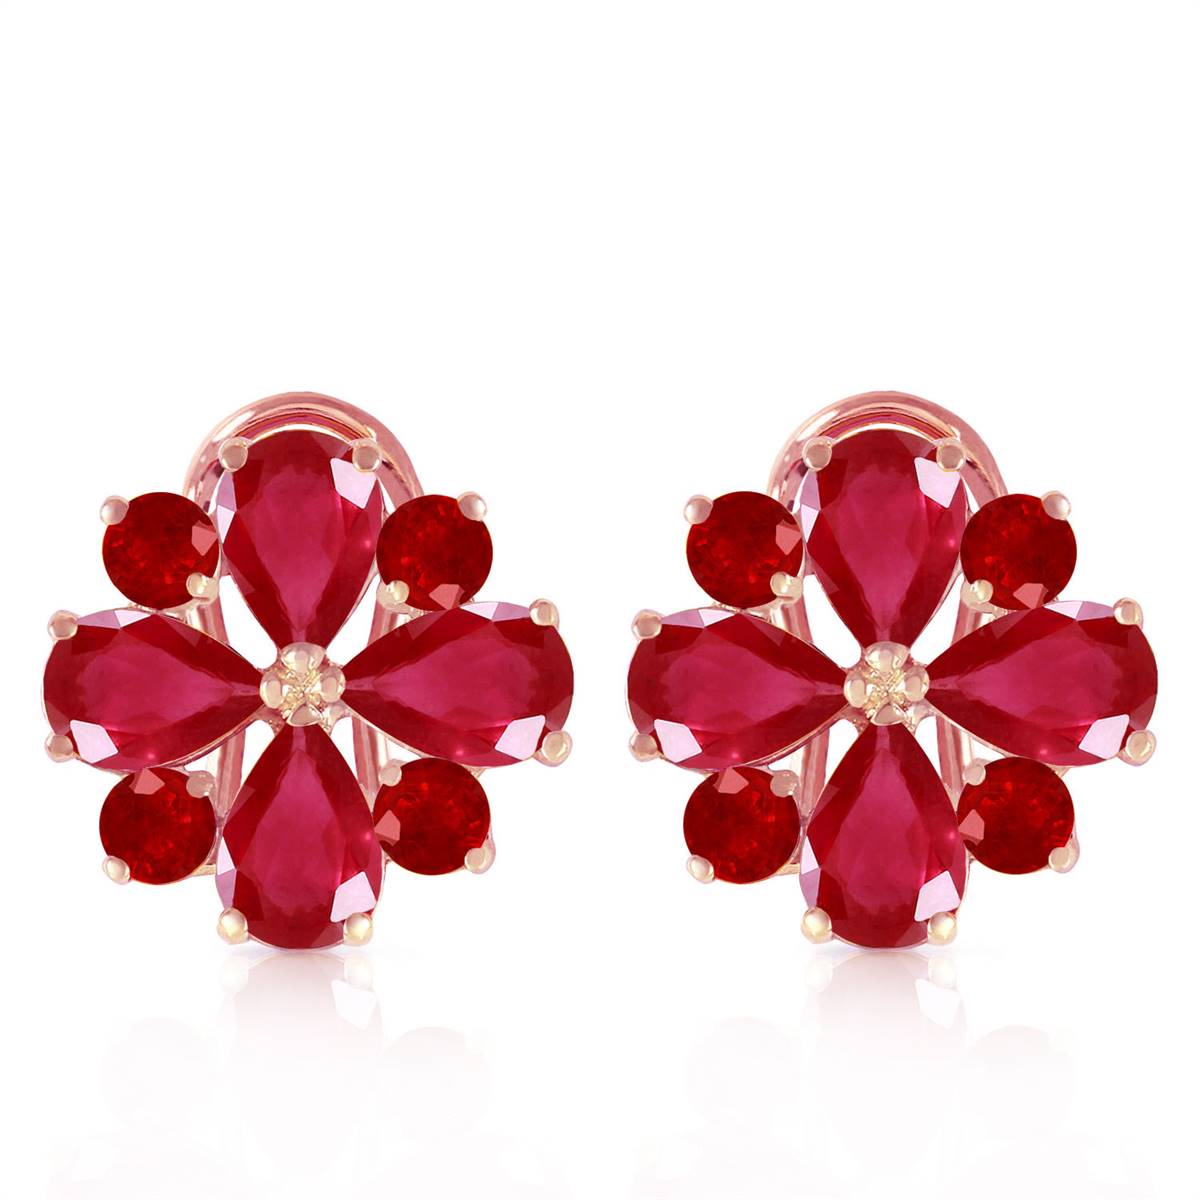 4.85 Carat 14K Solid Rose Gold French Clips Earrings Natural Ruby